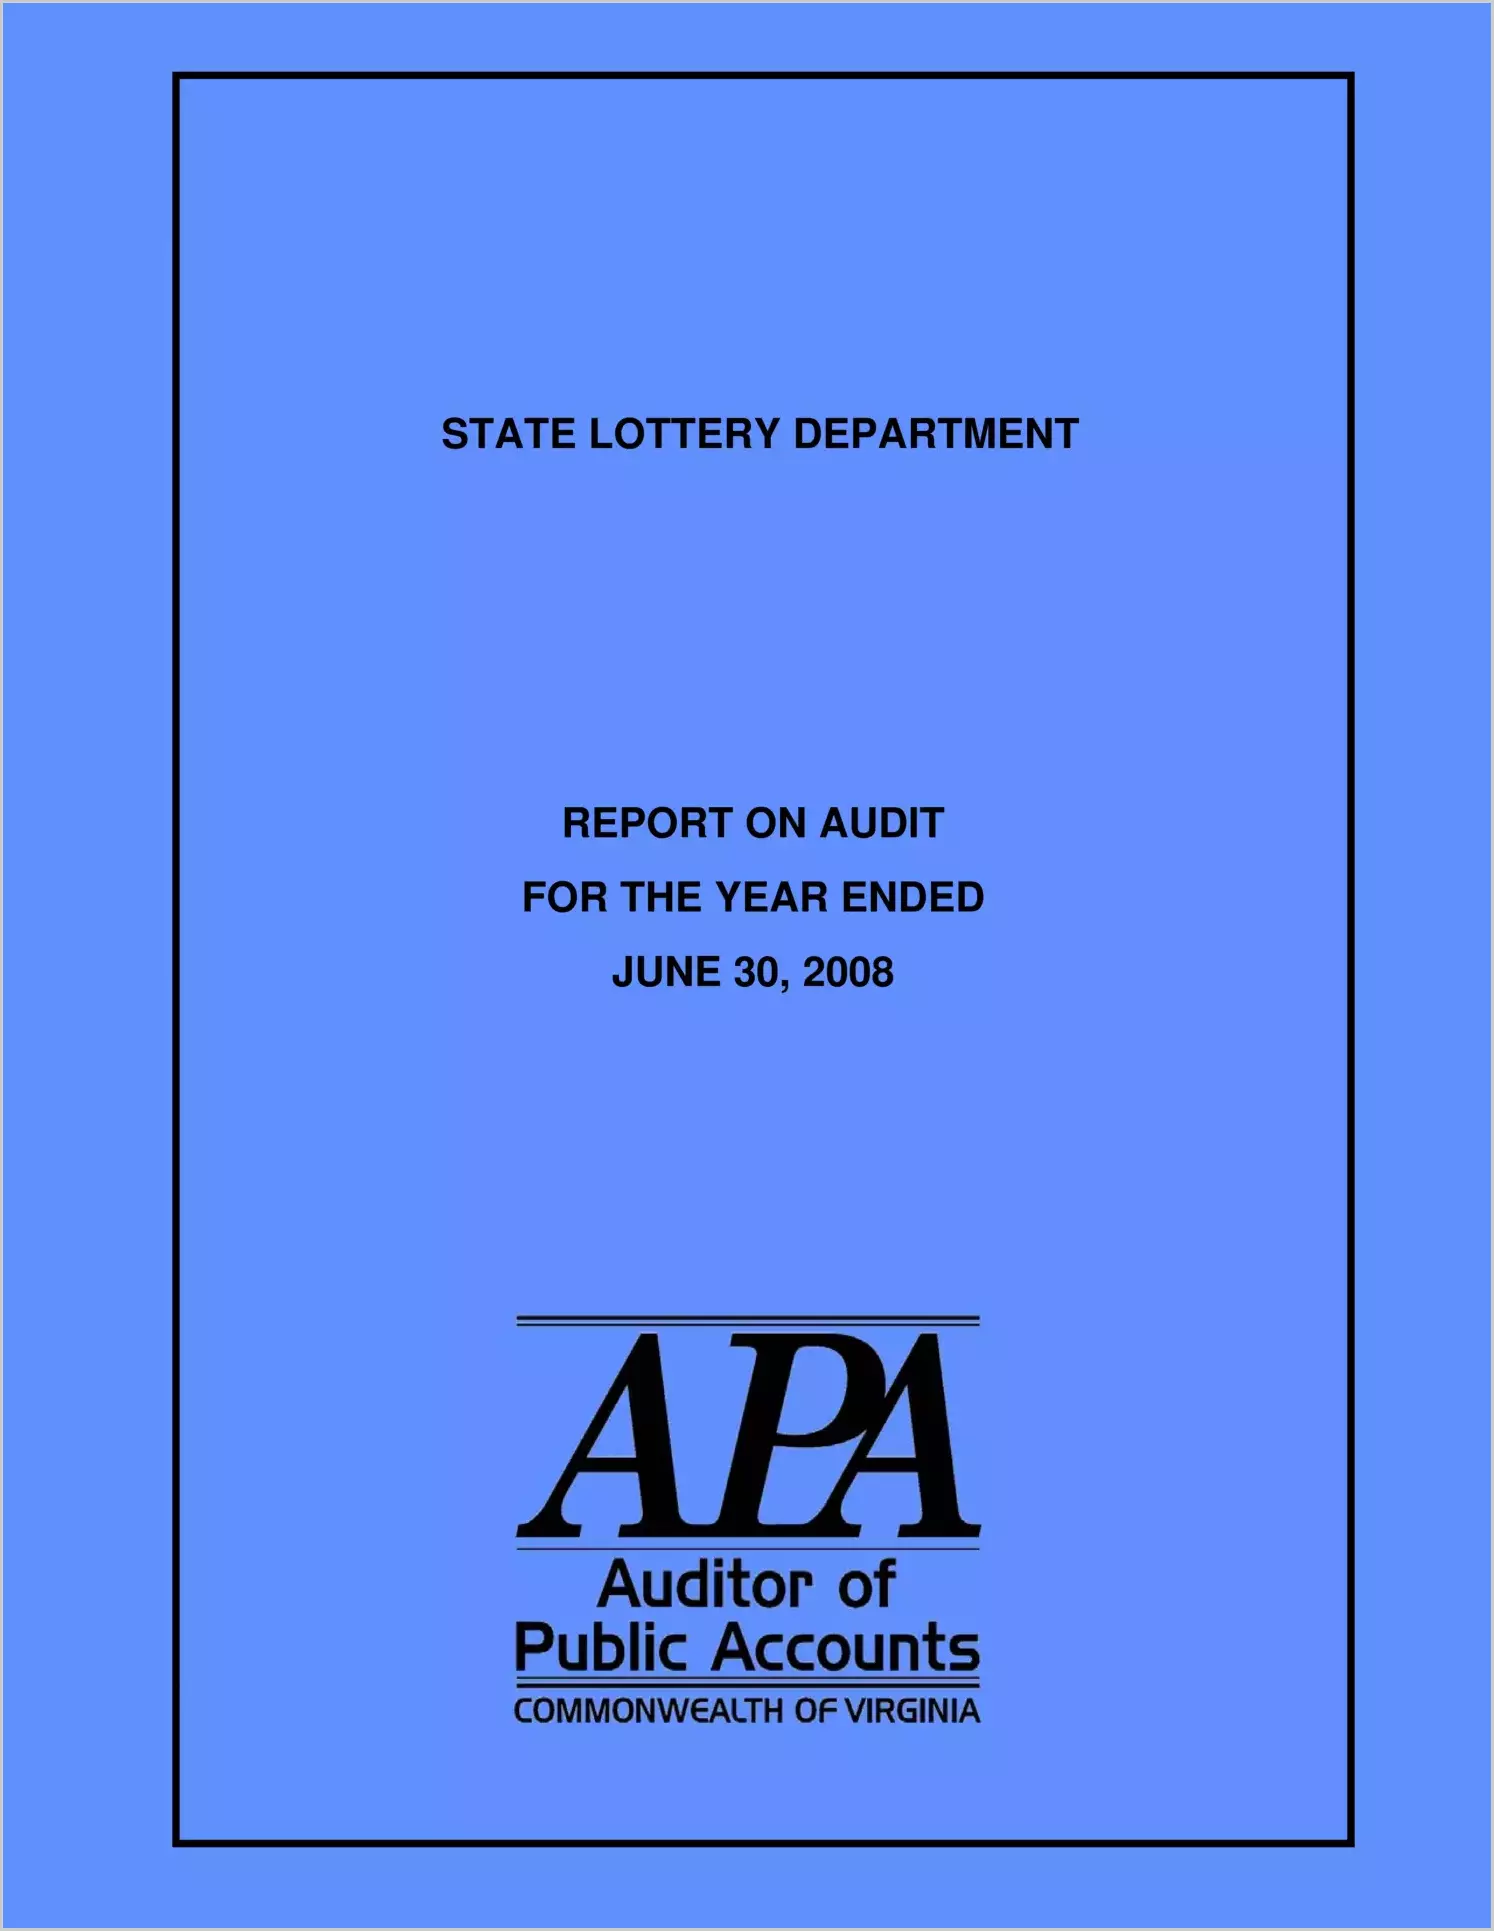 State Lottery Department for the year ended June 30, 2008